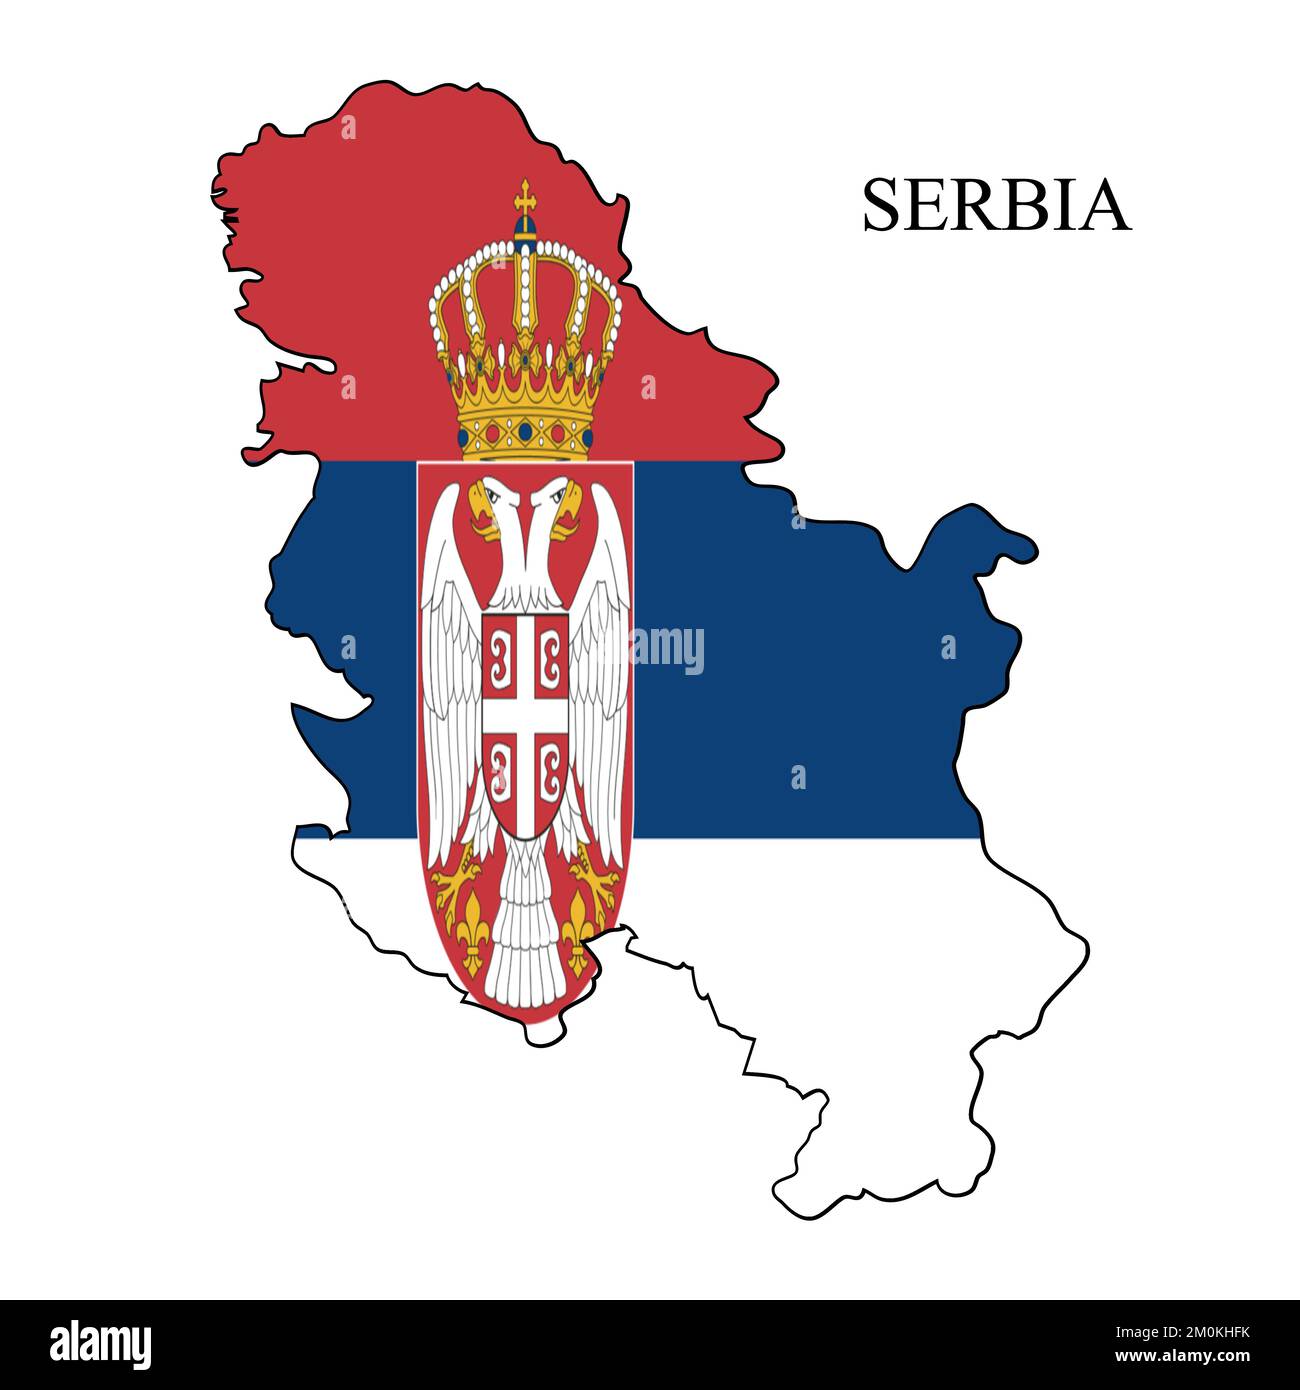 Serbia map vector illustration. Global economy. Famous country. Southern Europe. Europe. Stock Vector